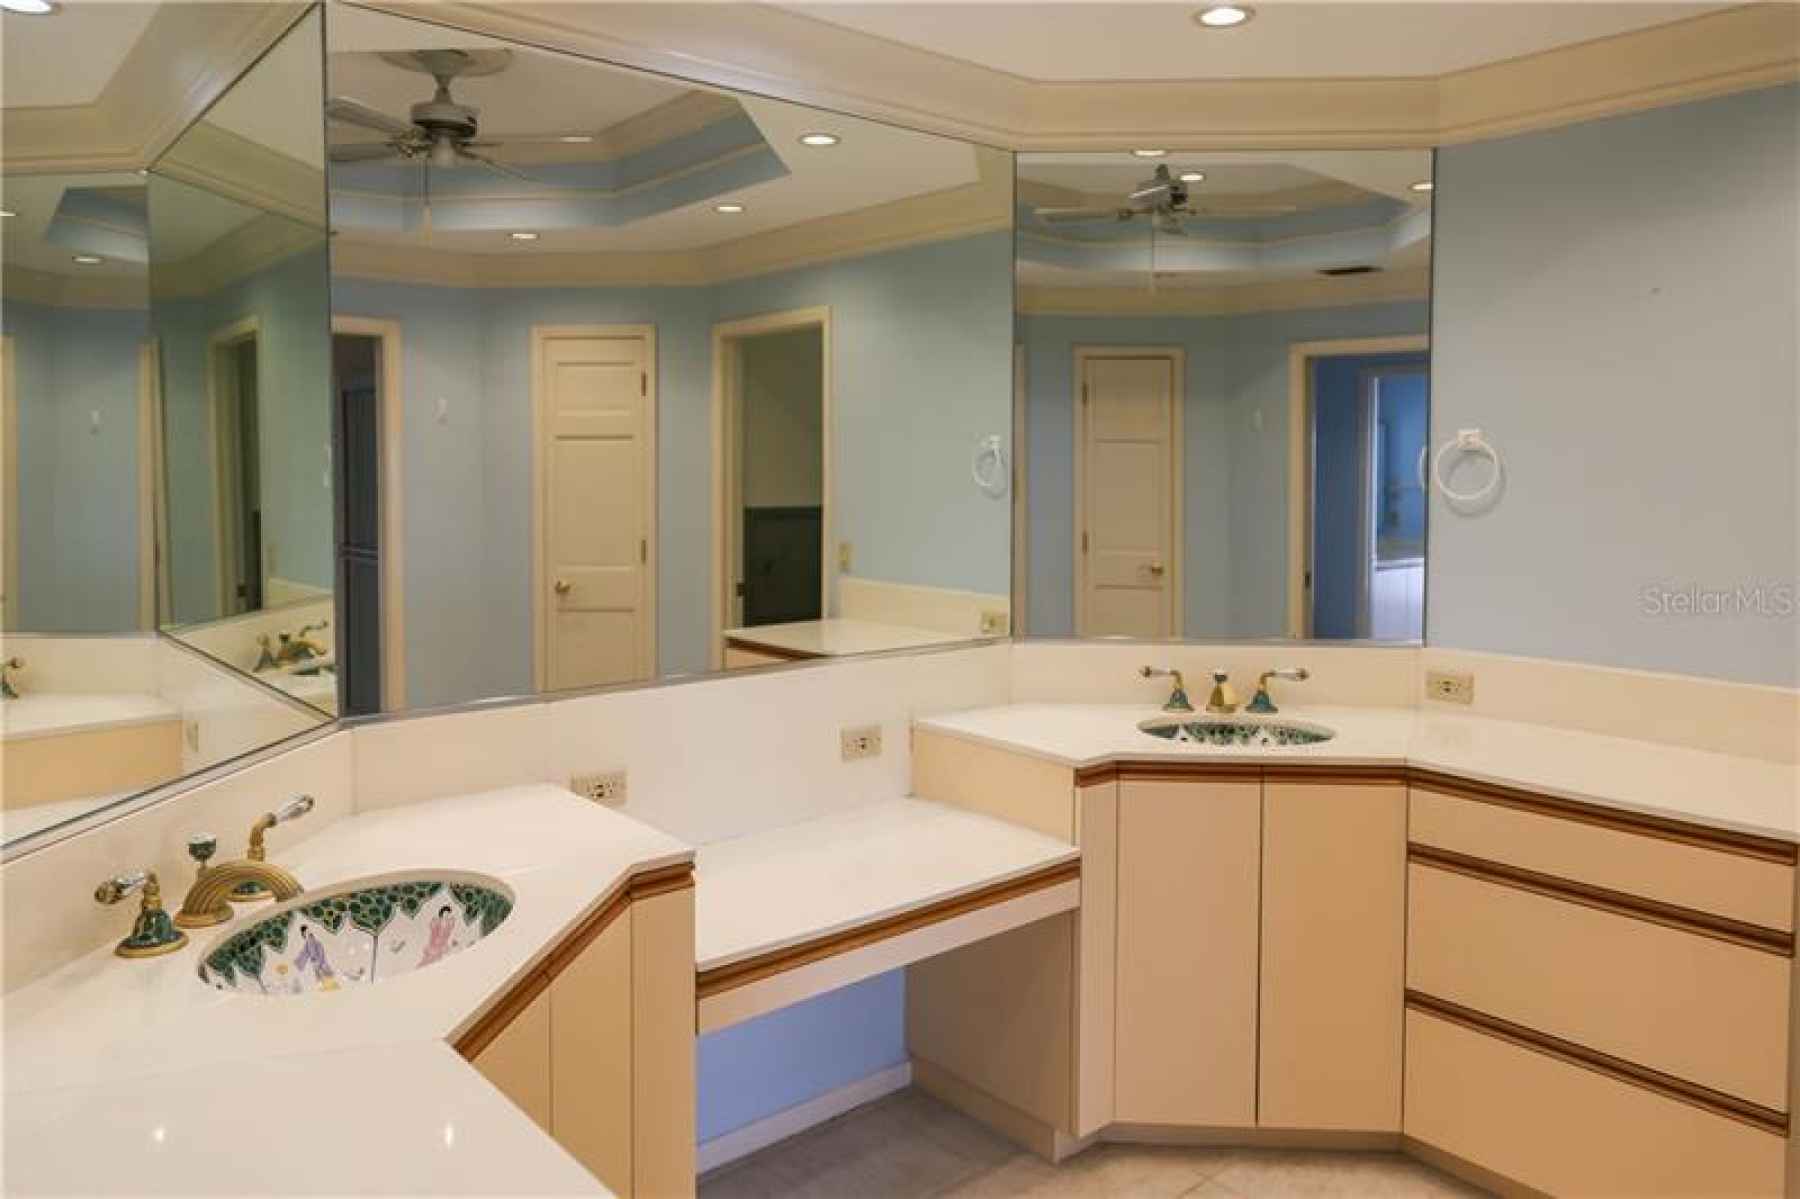 Owner's bath with double sinks and vanity plus extra cabinets and counter space.